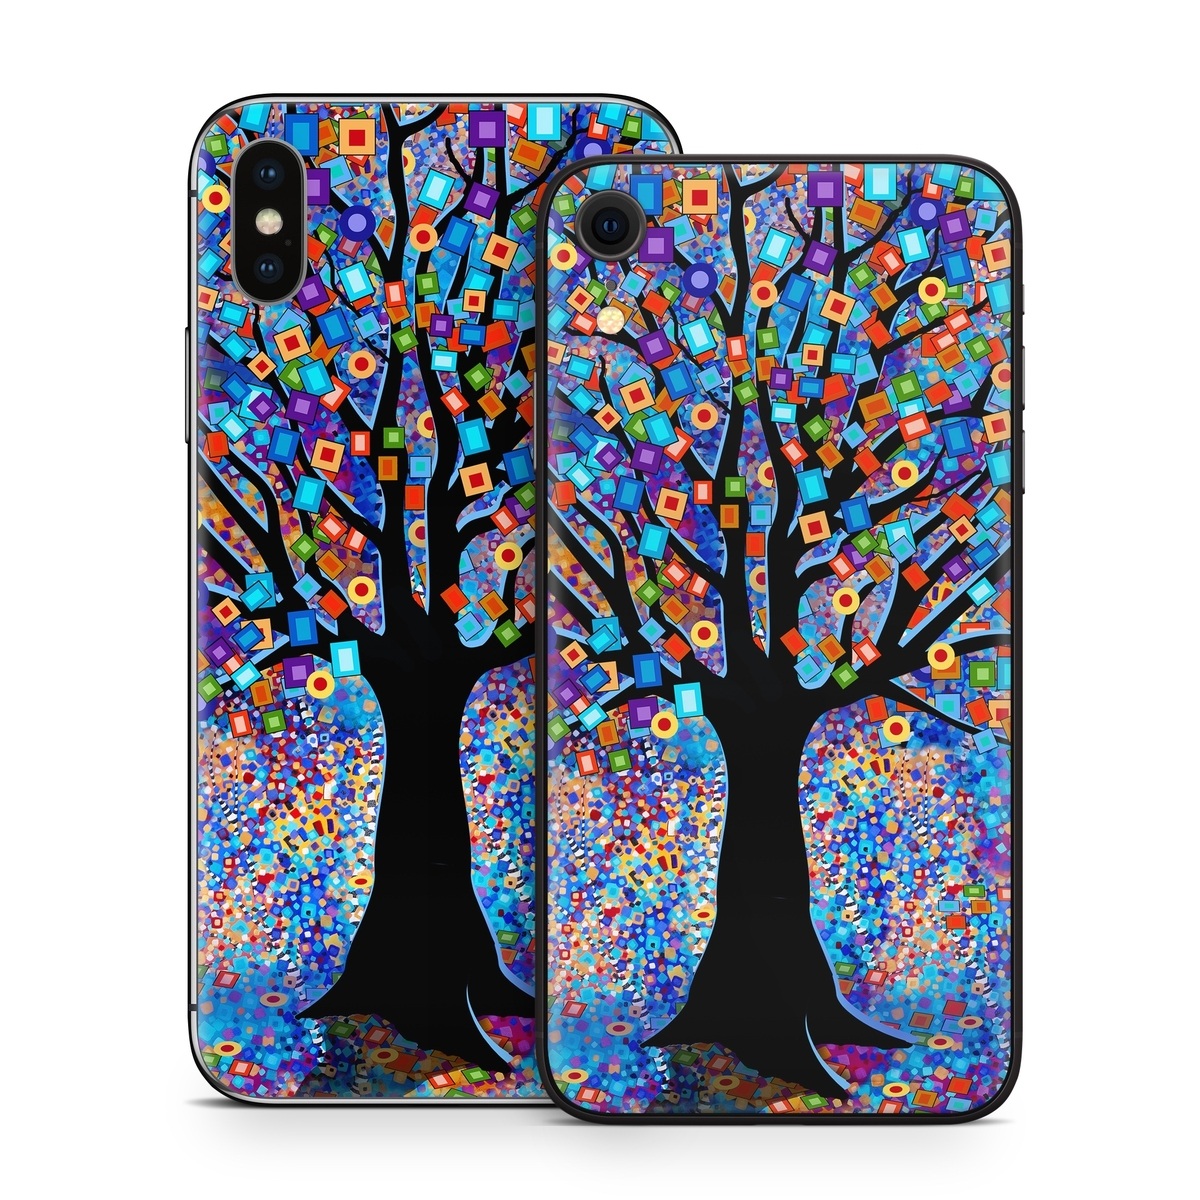 iPhone XS Skin design of Psychedelic art, Modern art, Art, with black, blue, red, orange, yellow, green, purple colors